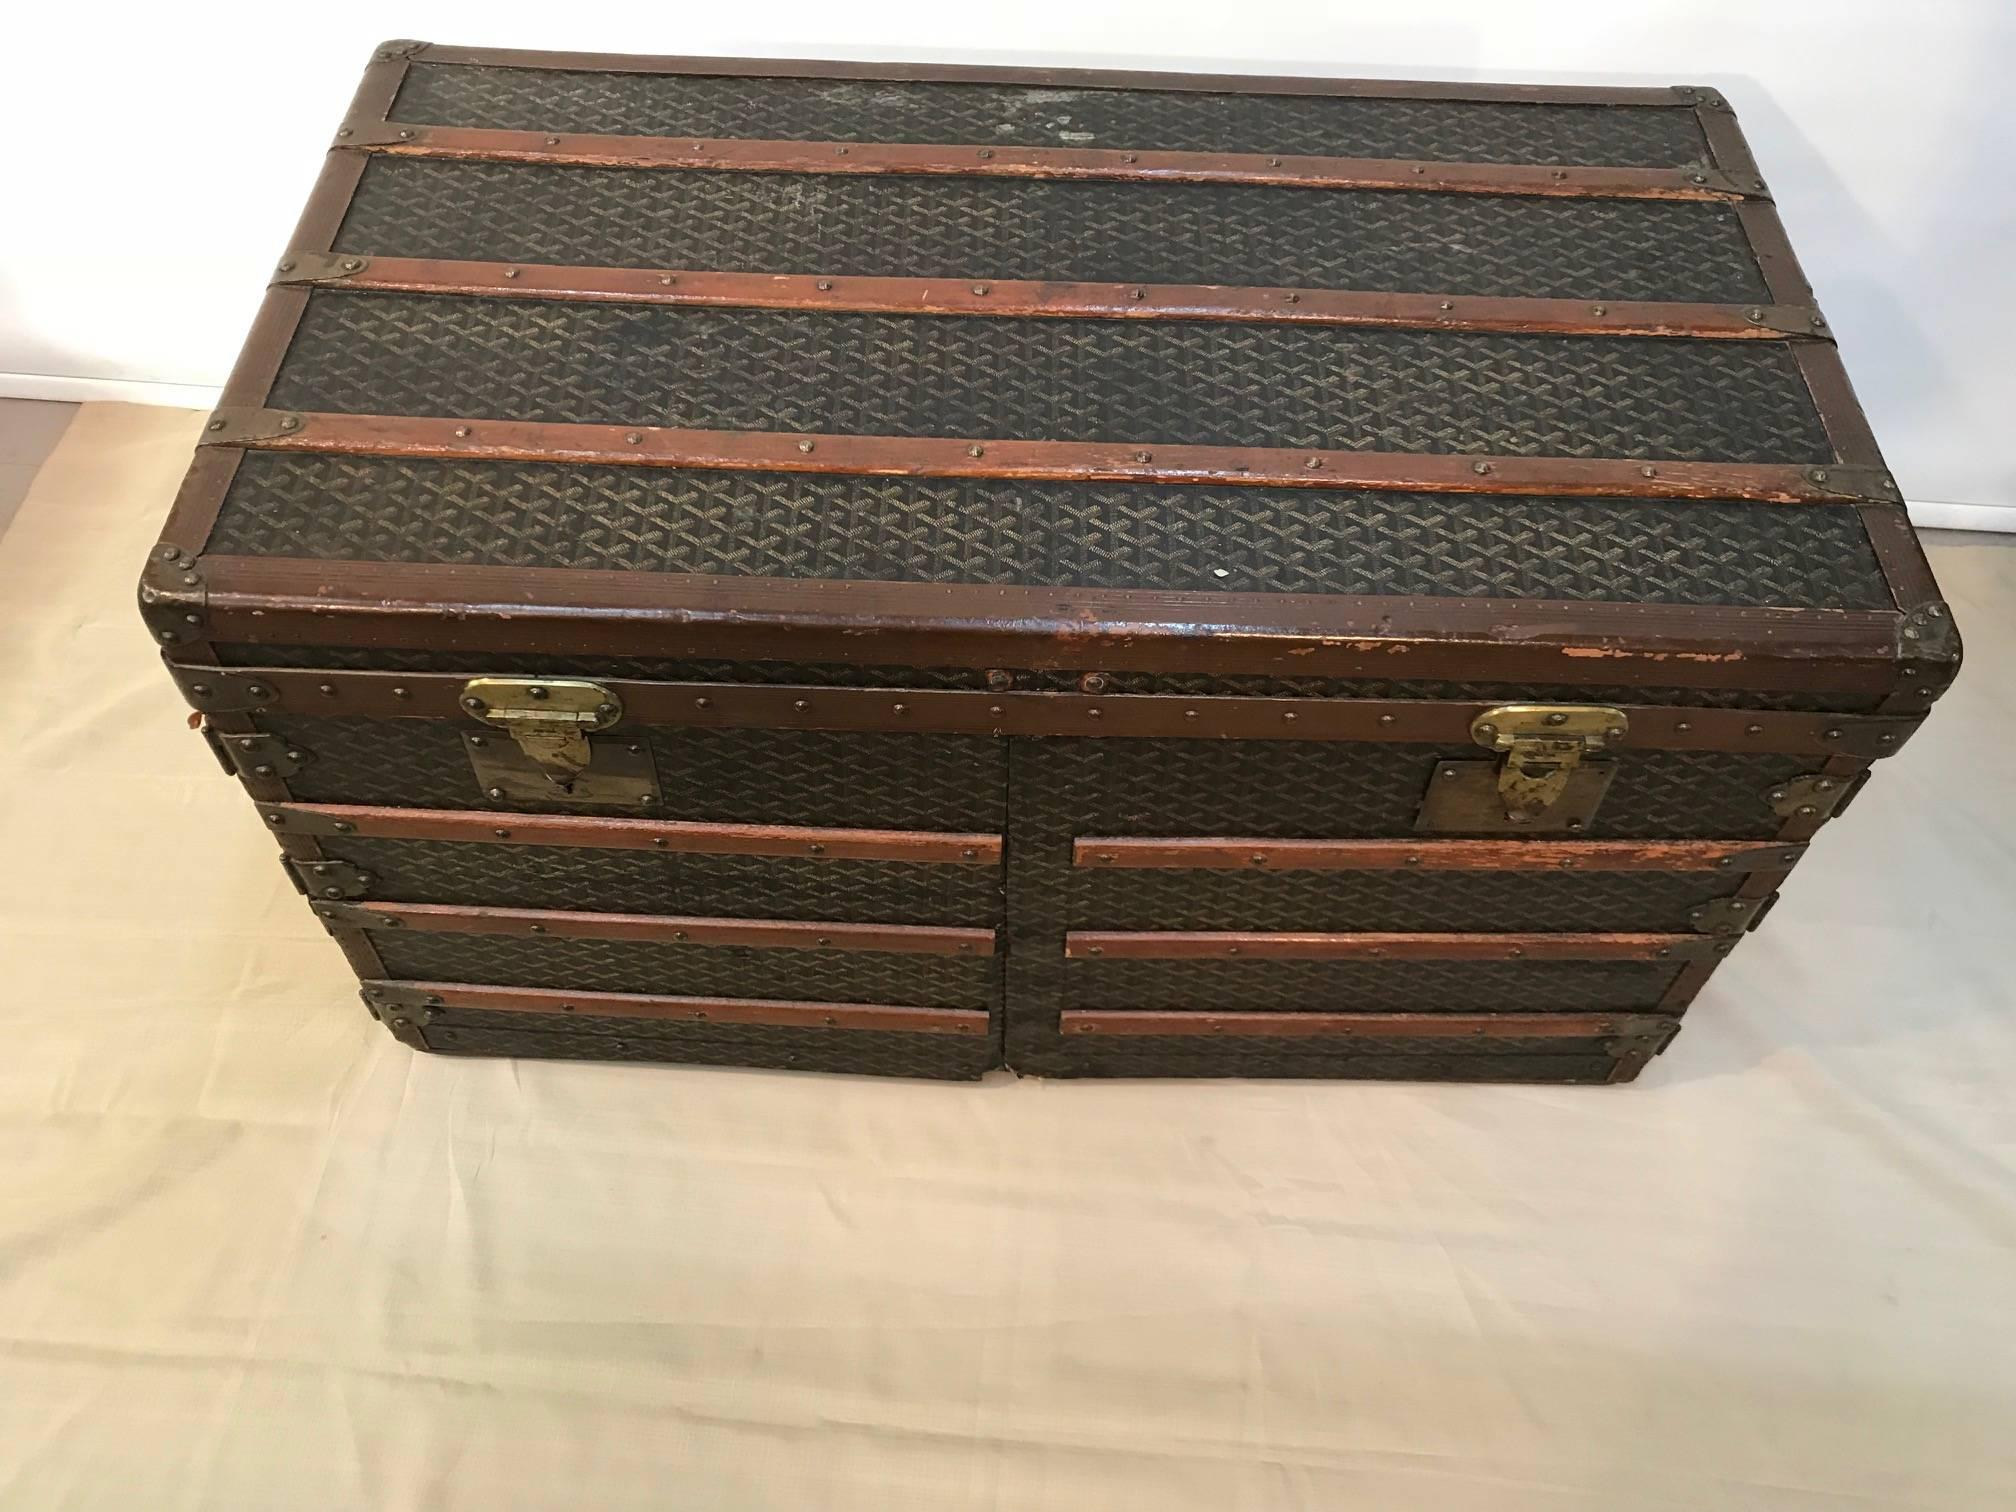 This superb example of the French luggage maker's art combines quality, beauty and functionality in equal measure. Unusually for such a trunk, it opens from the front with two doors as well from the top, (This is why the ribs are short on the